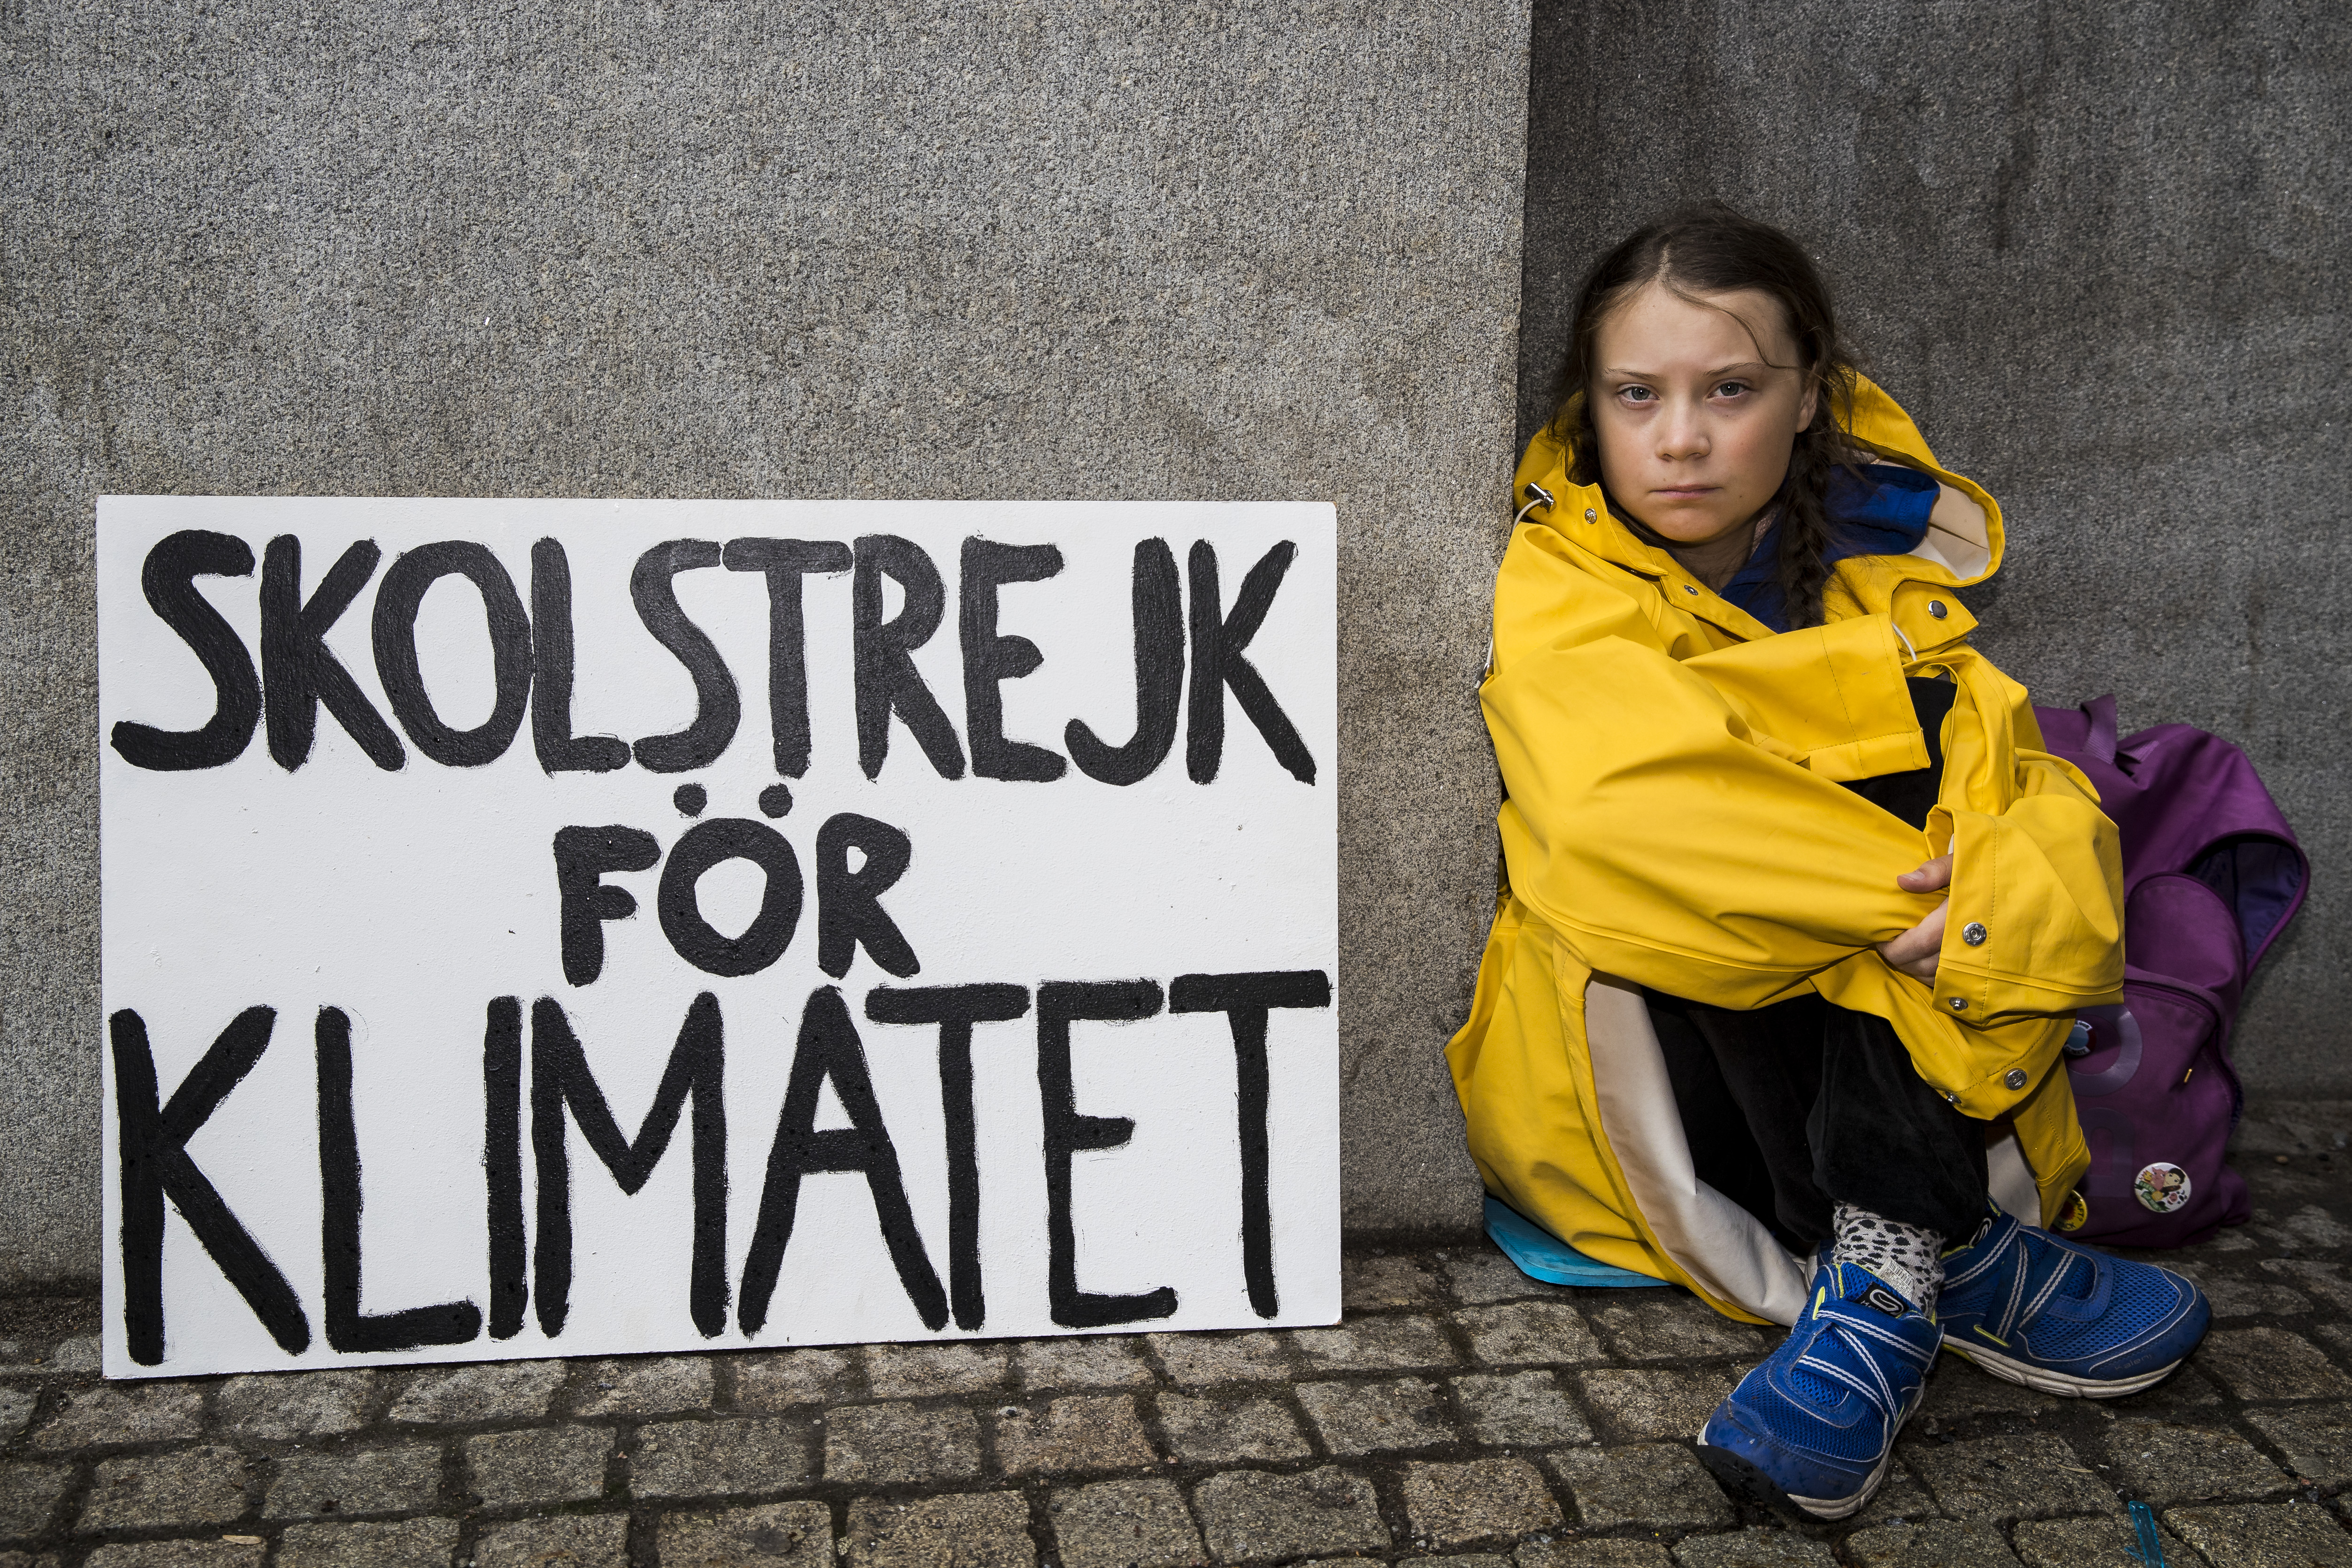 Greta Thunberg sitting on the ground next to a protest sign